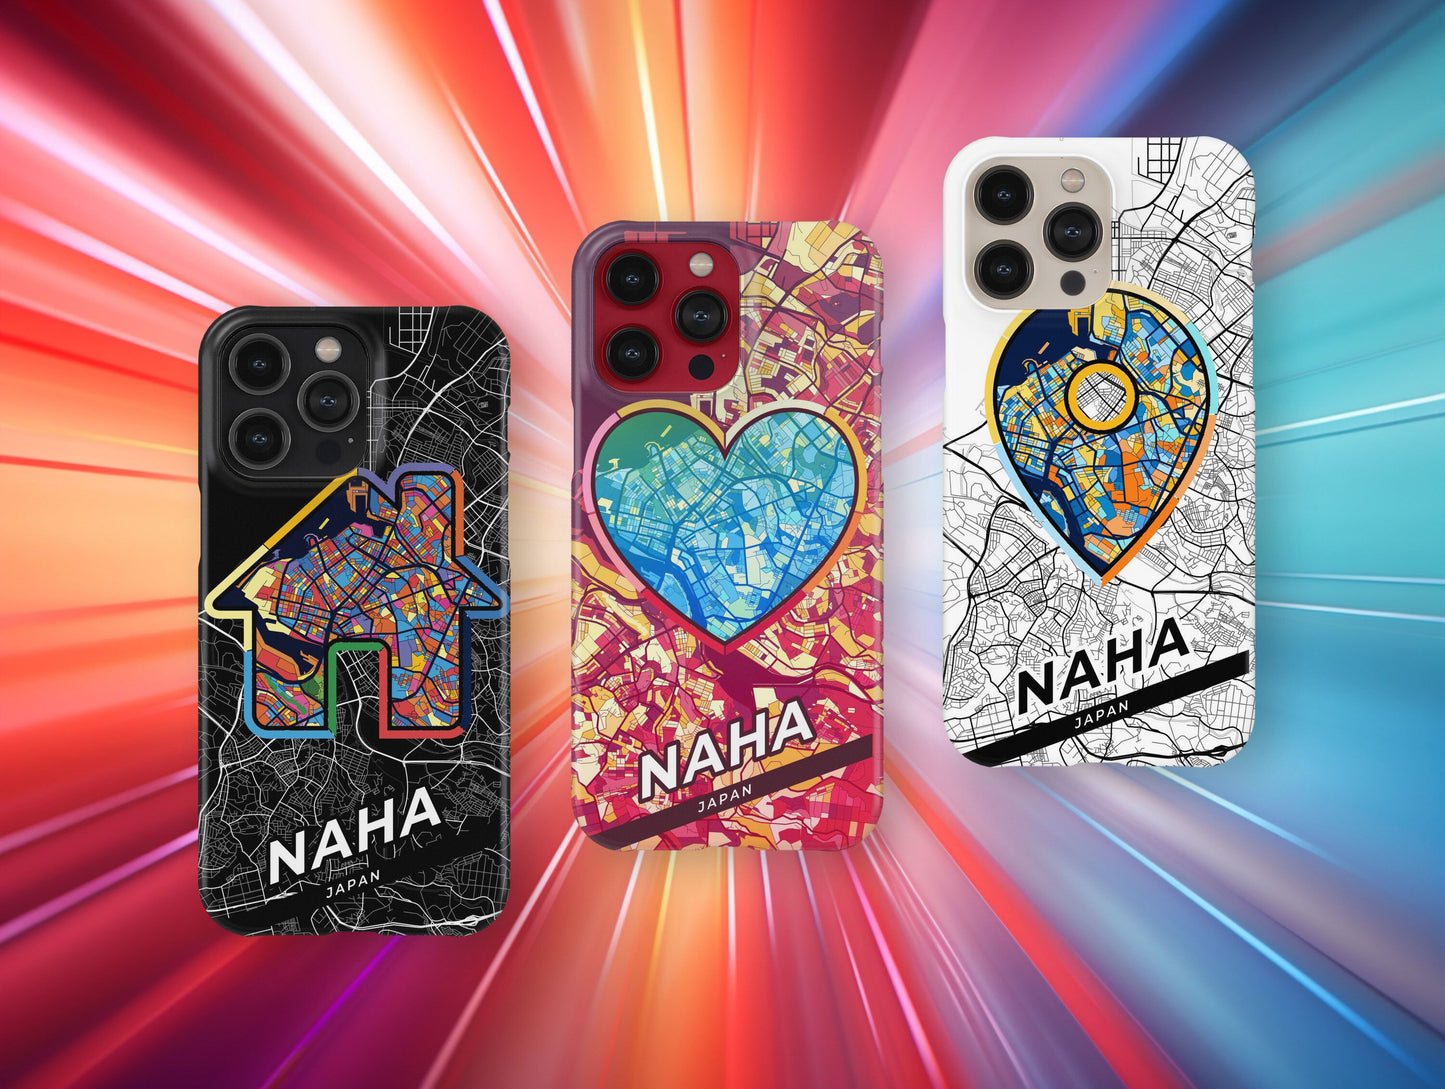 Naha Japan slim phone case with colorful icon